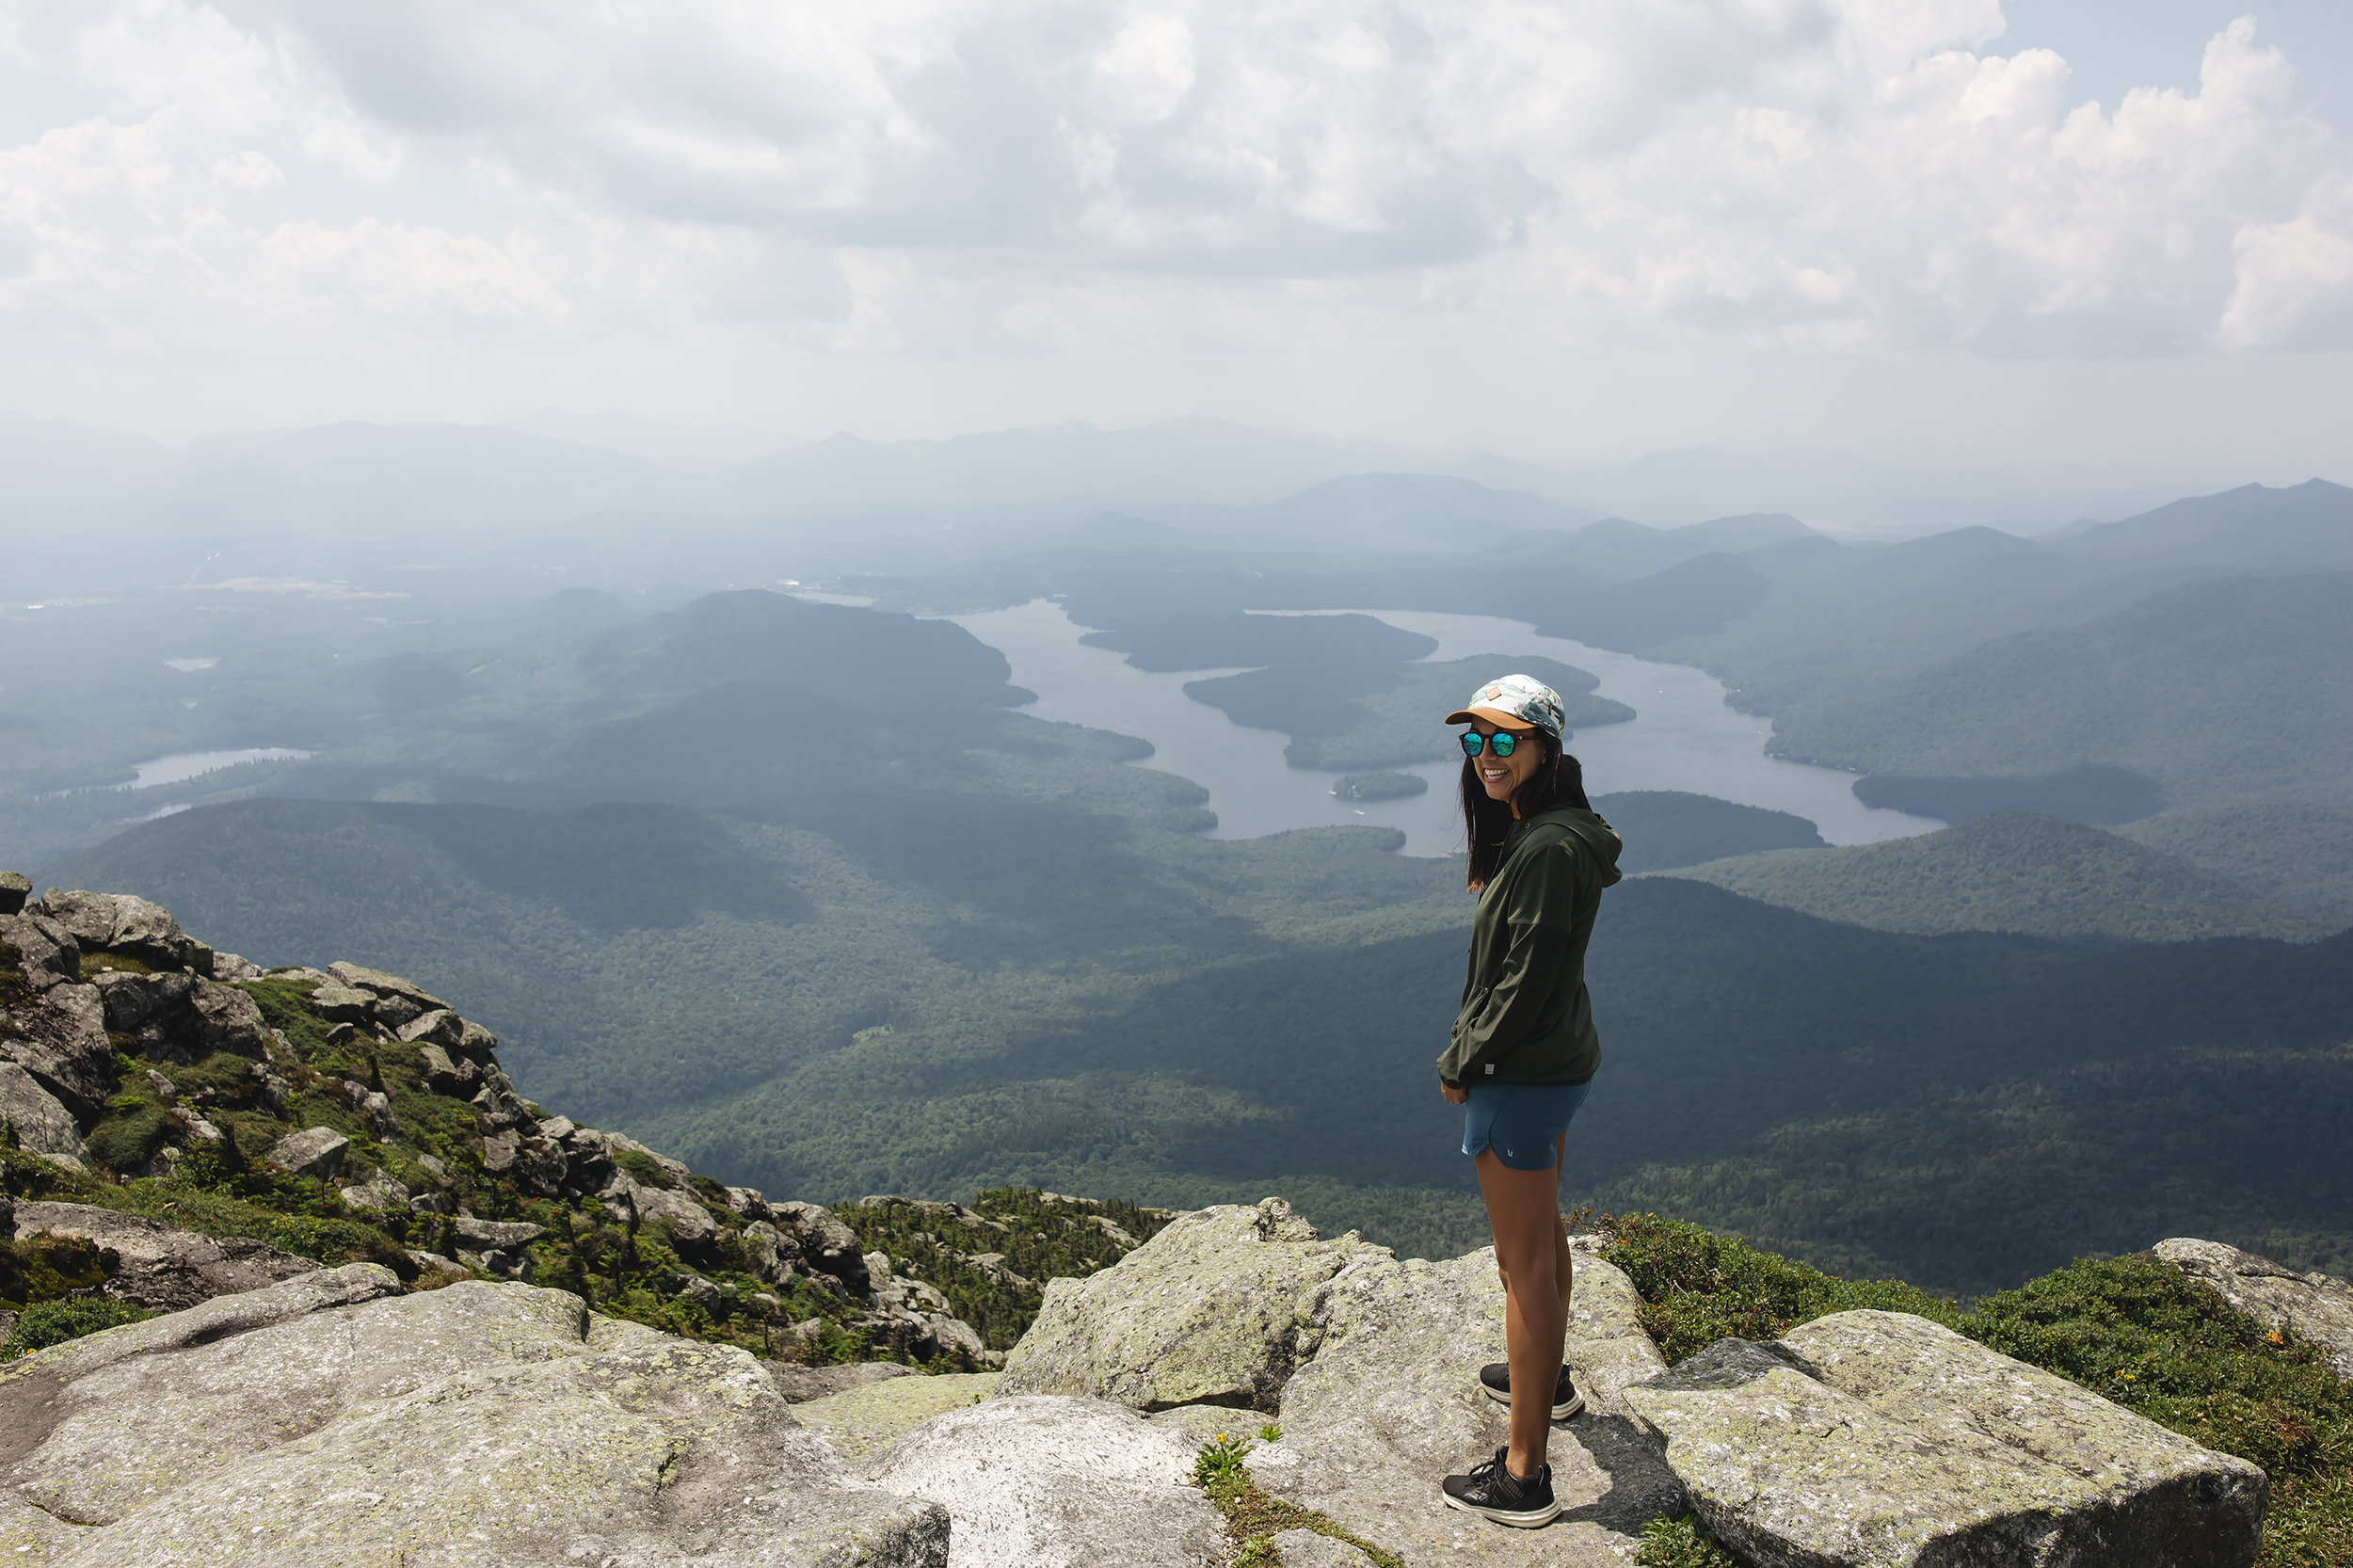 Hike to the top of Whiteface Mountain to take in the Lake Views